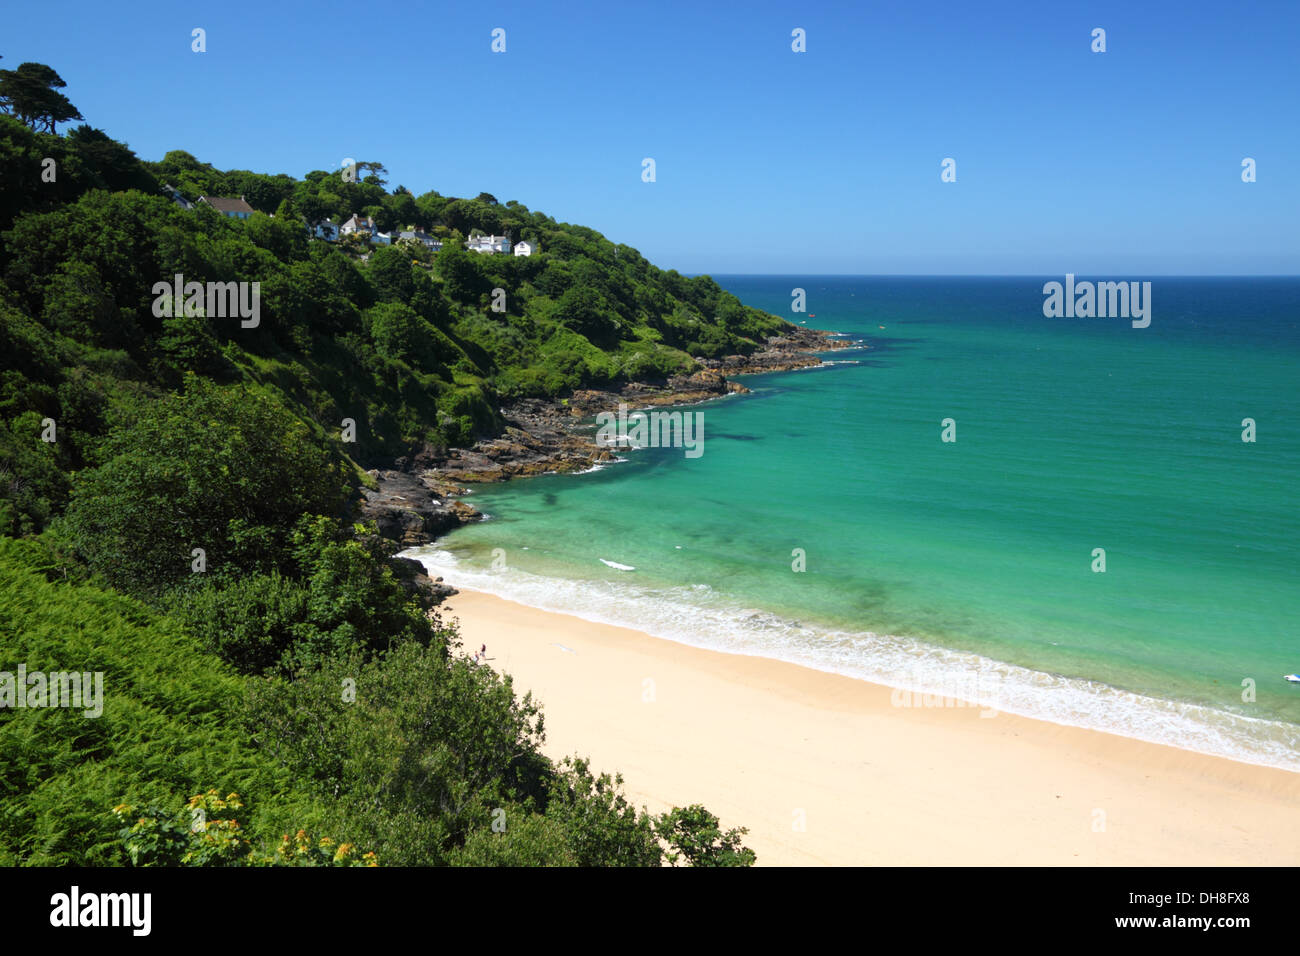 A golden sandy beach with turquoise blue sea and lush green cliffs. Stock Photo